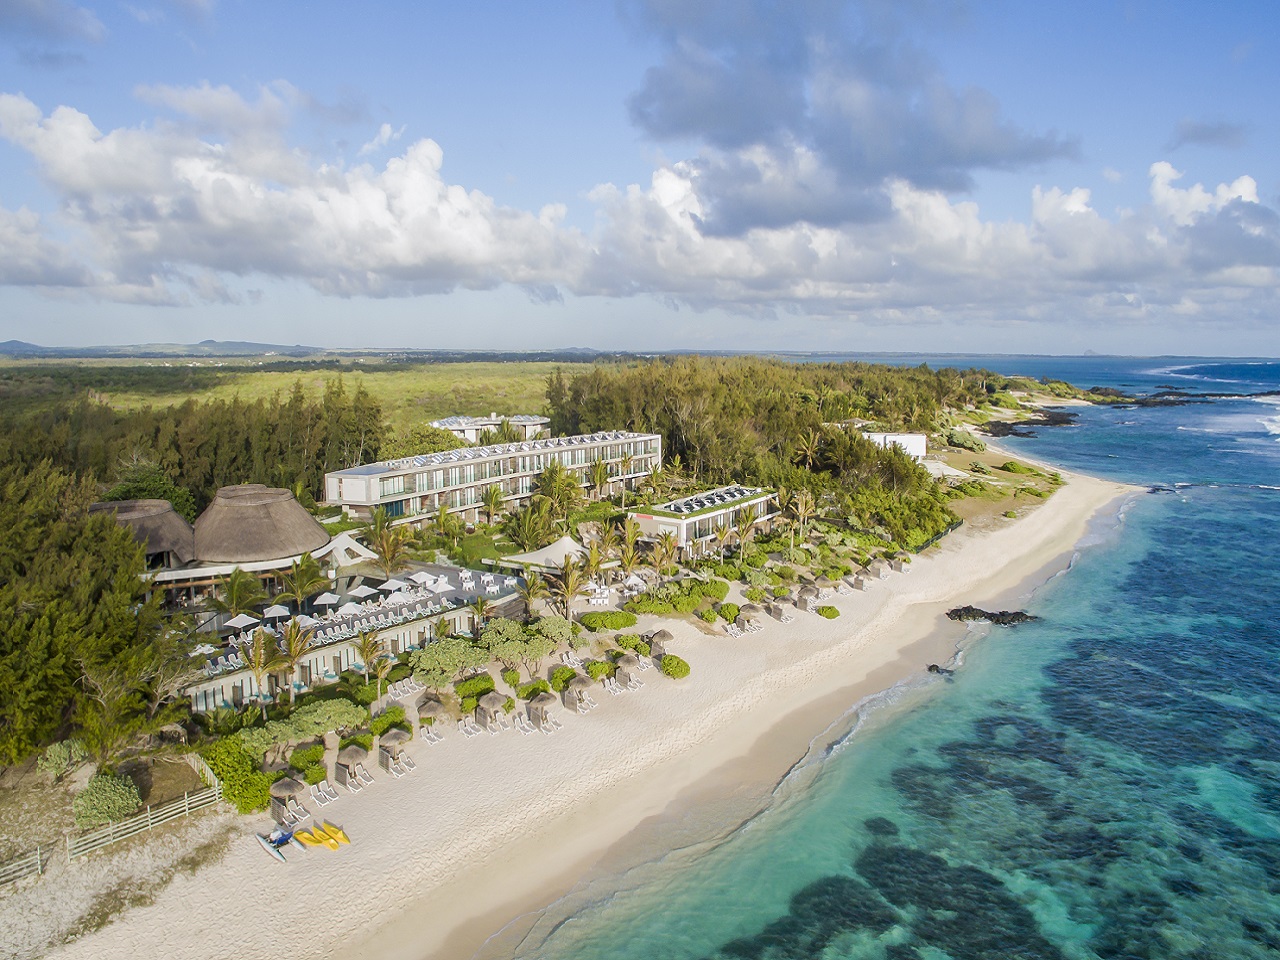 Mauritius experienced another year of record tourism arrivals in 2017 allowing the country to record positive hotel operatin